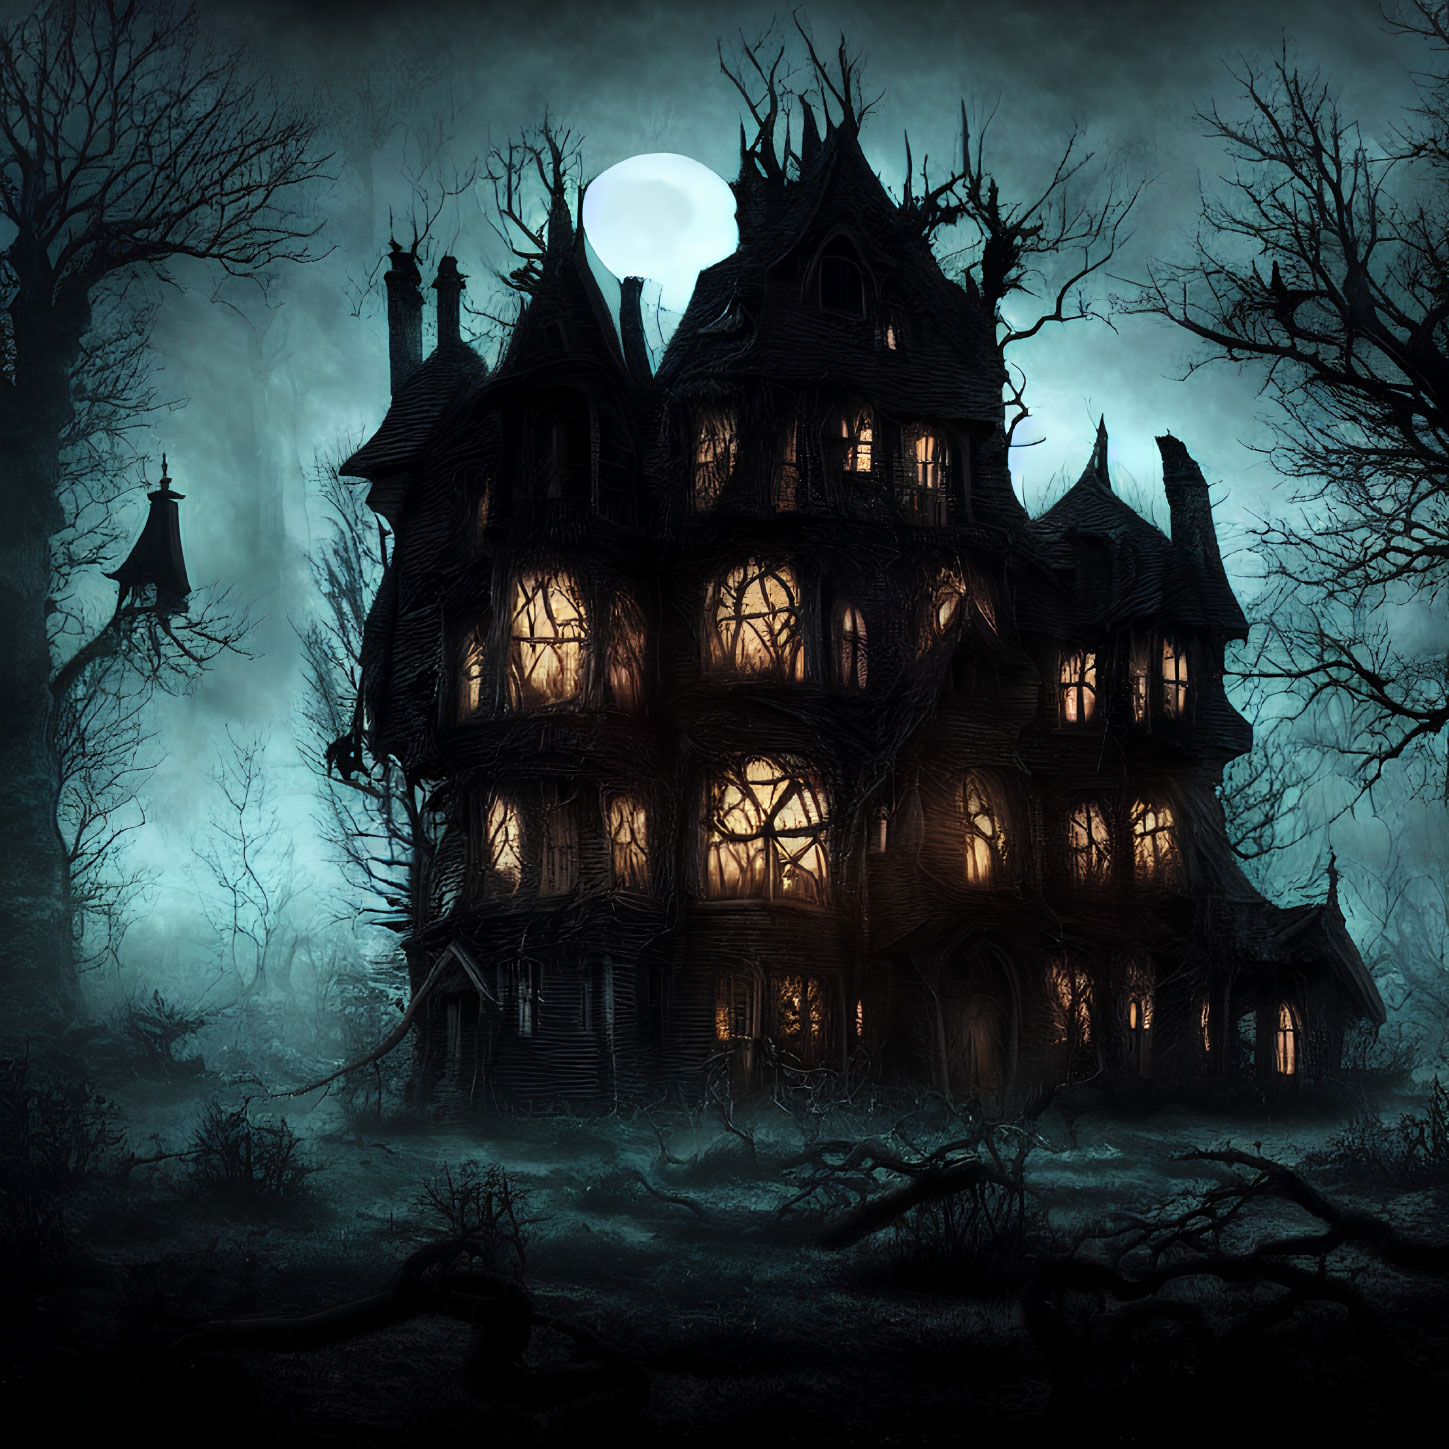 Victorian mansion at night with glowing windows under full moon